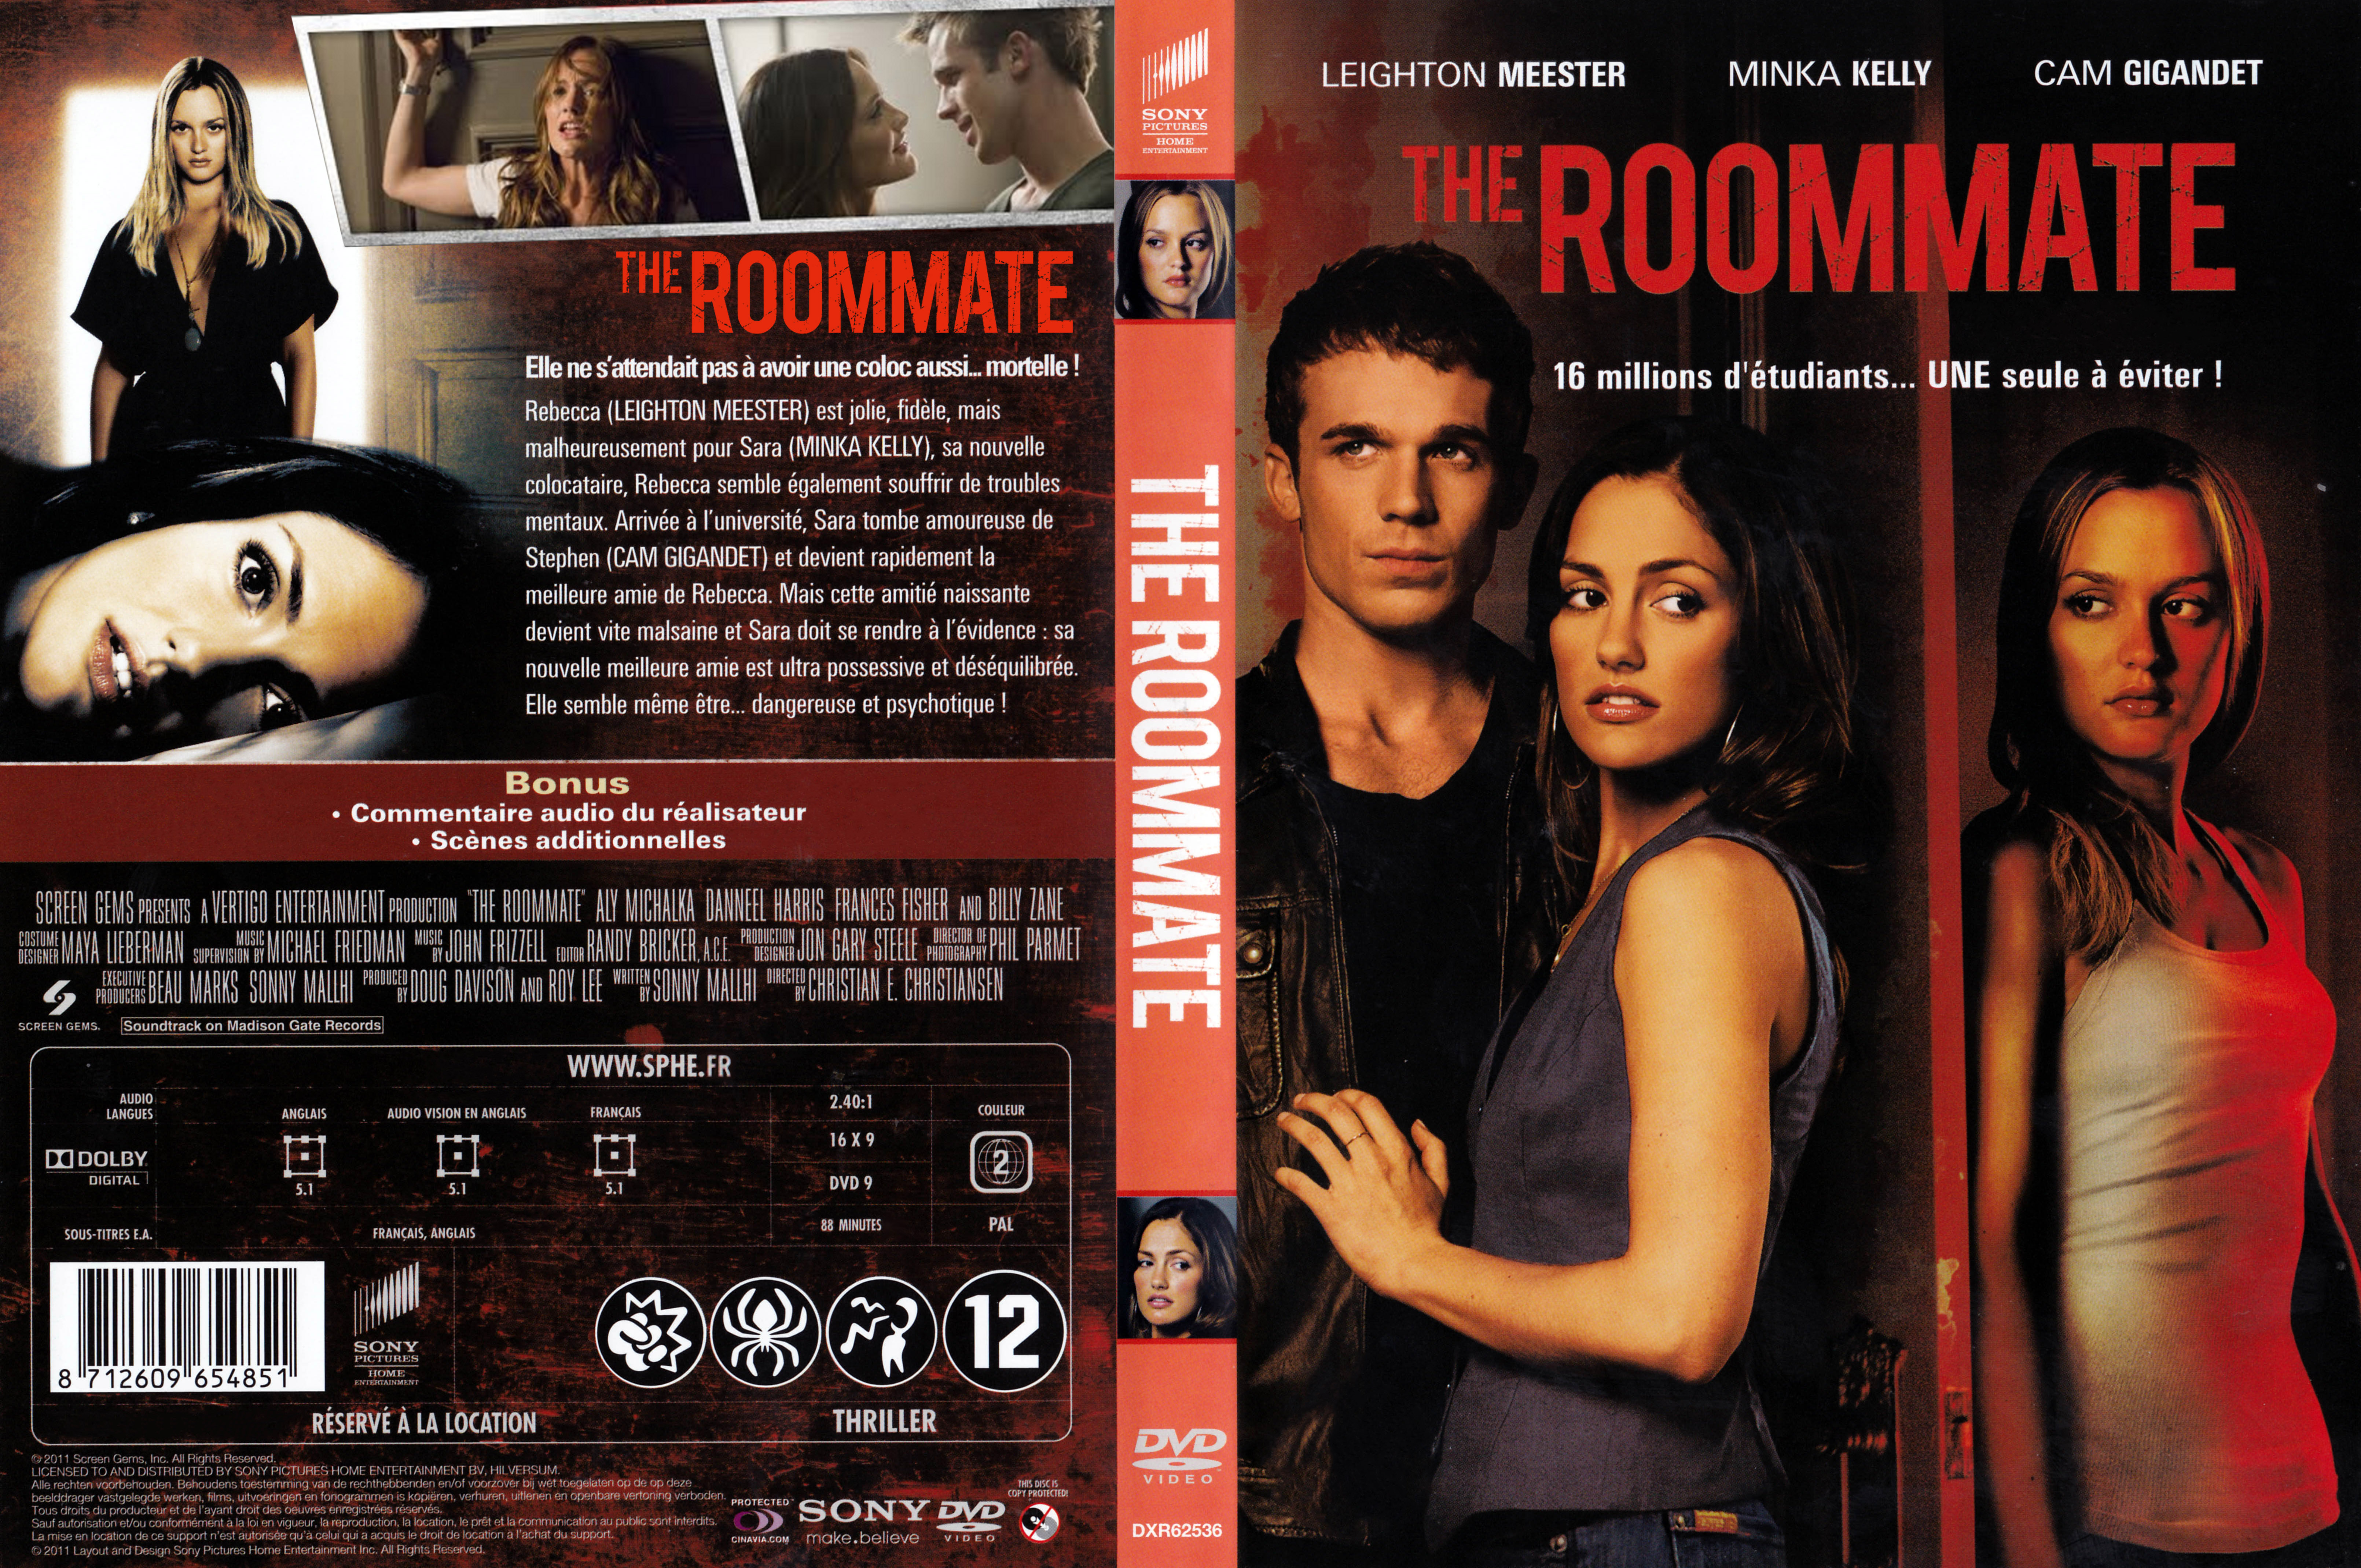 Jaquette DVD The Roommate custom